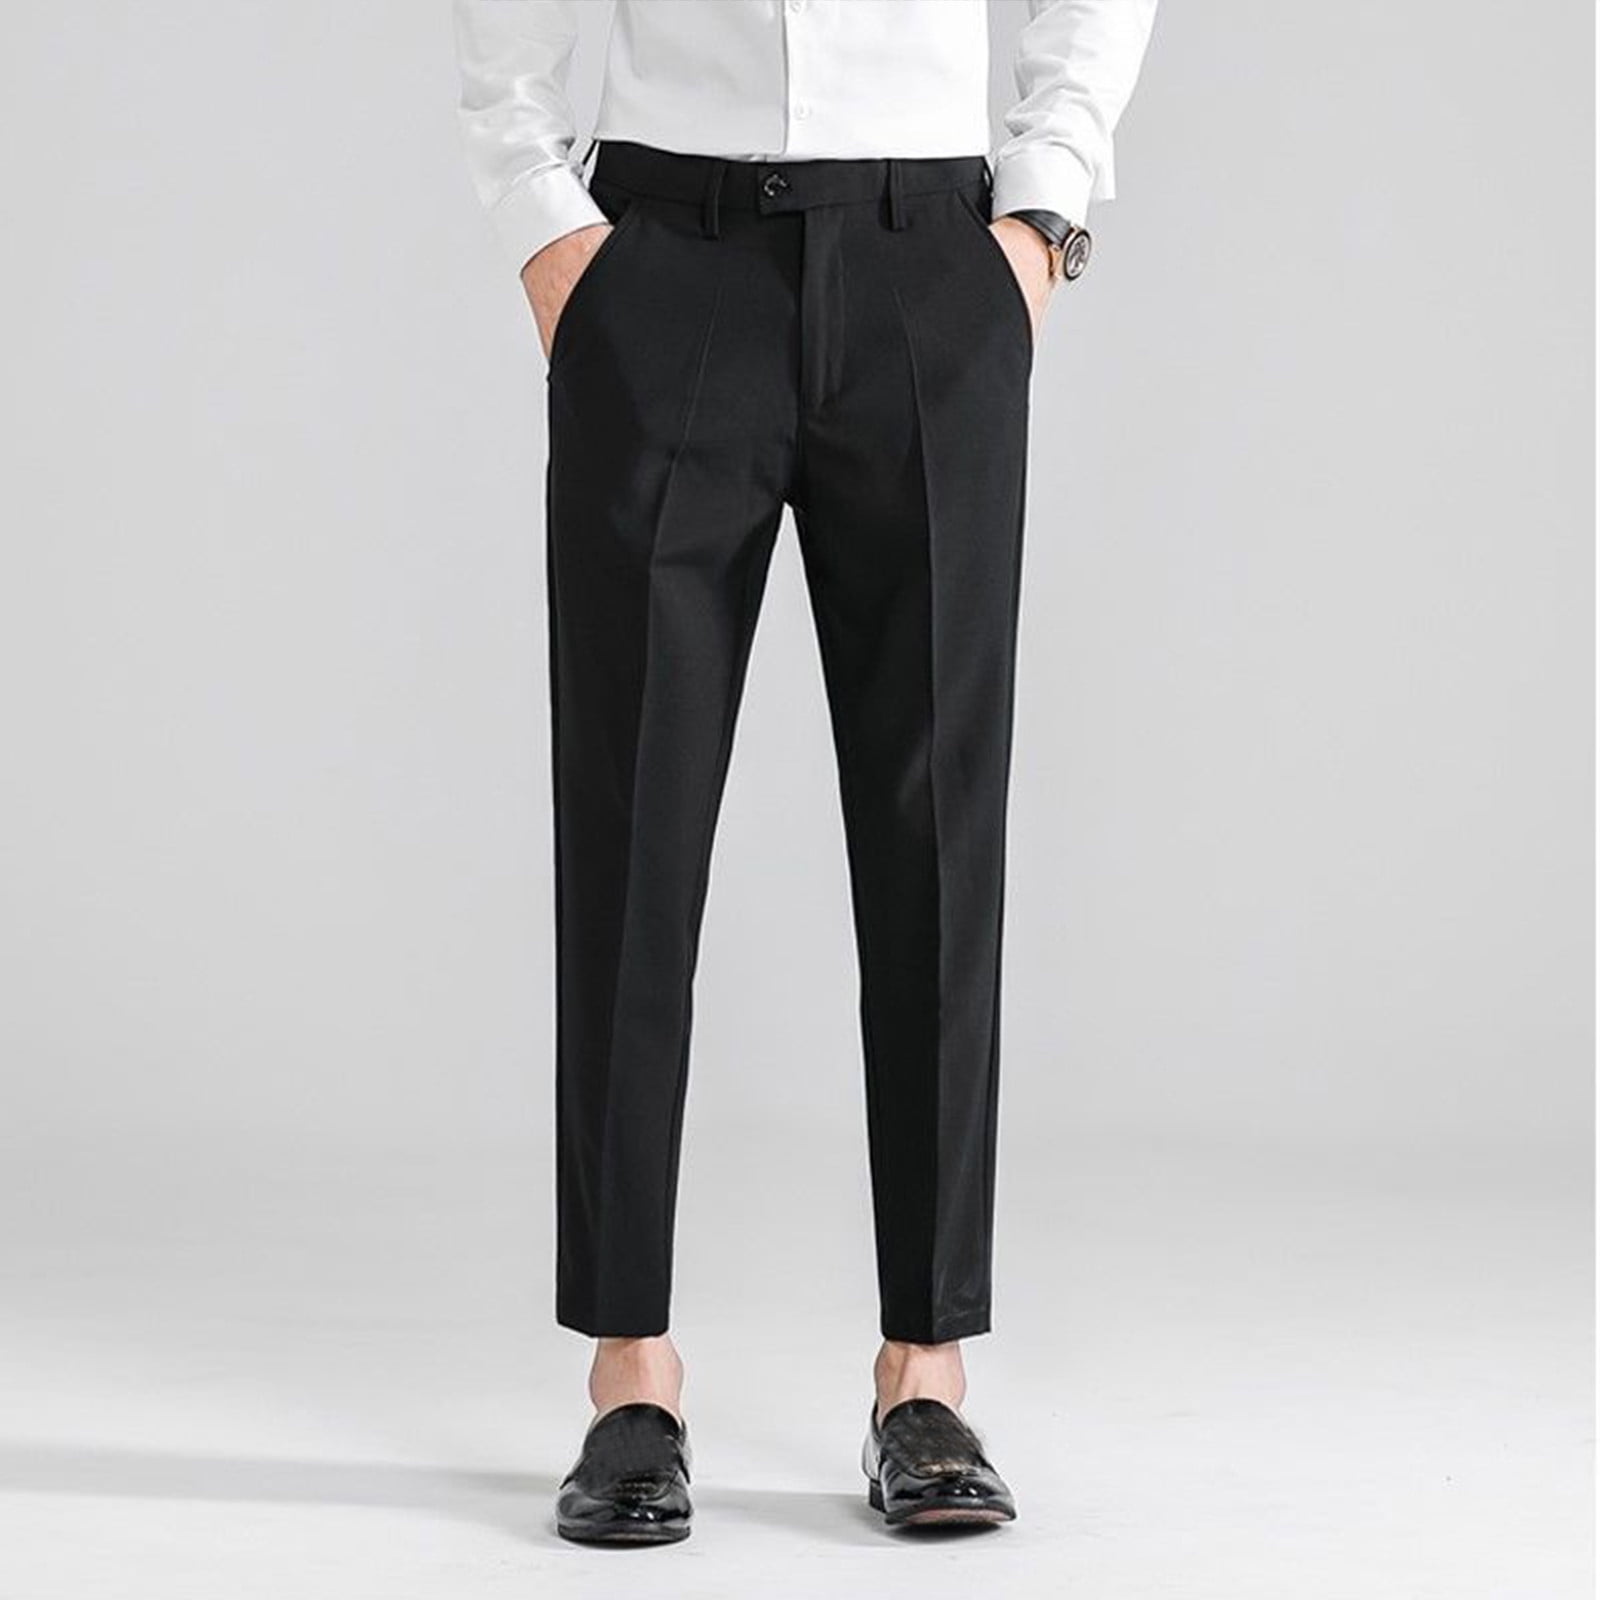 Navy Stretch Cotton Dress Pant - Custom Fit Tailored Clothing